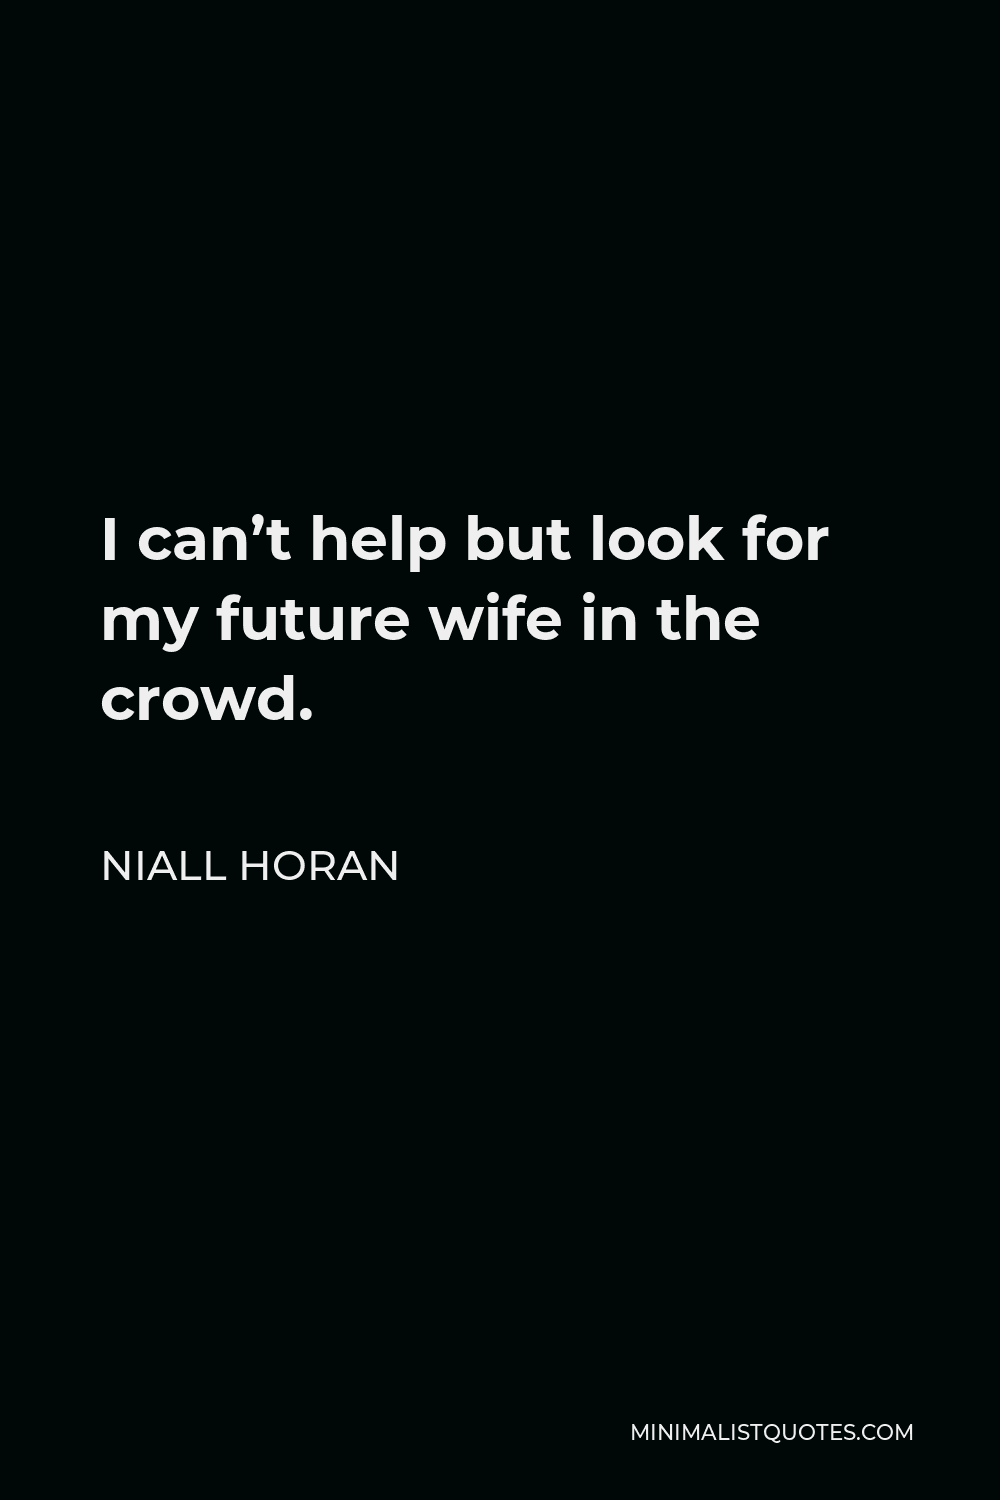 Niall Horan Quote - I can’t help but look for my future wife in the crowd.